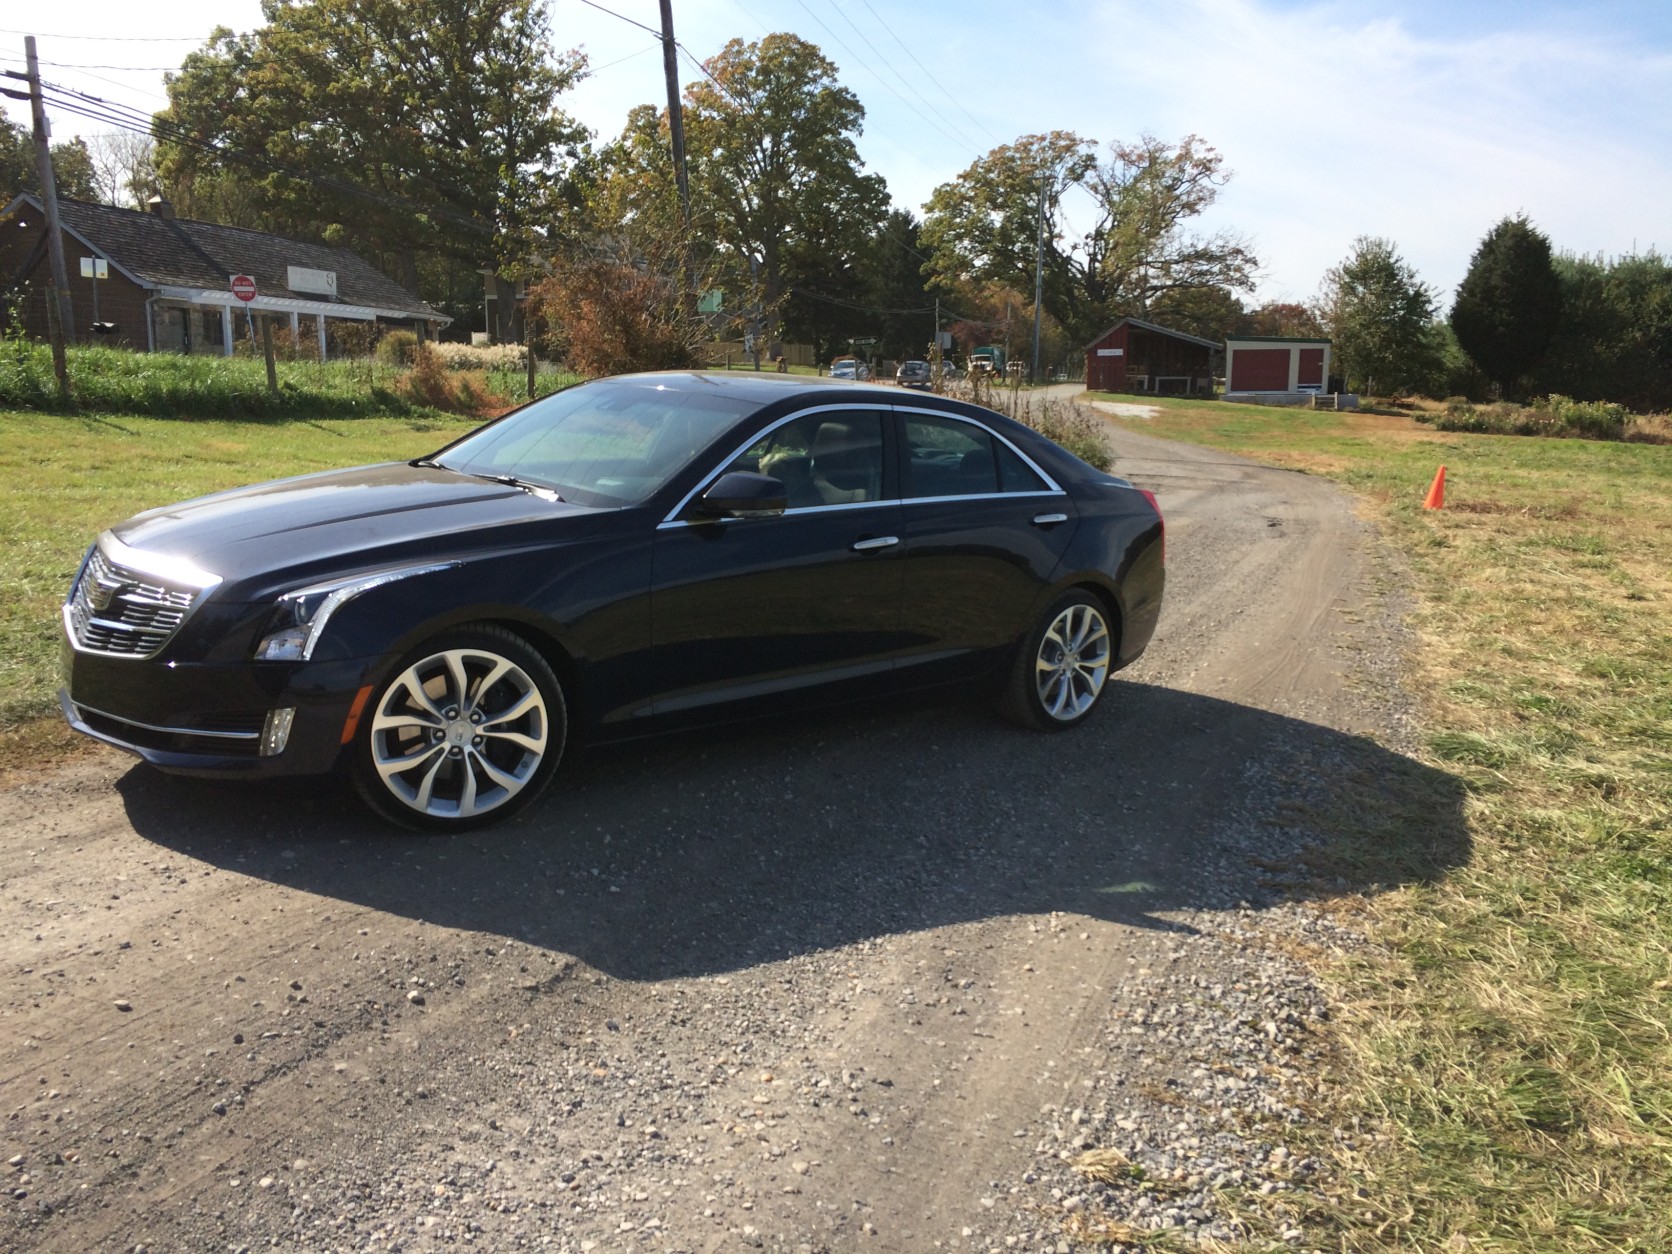 The Cadillac ATS still has modern standout looks with sharp angles and cool looking headlights that stretch from the bumper up to the hood. (WTOP/Mike Parris)